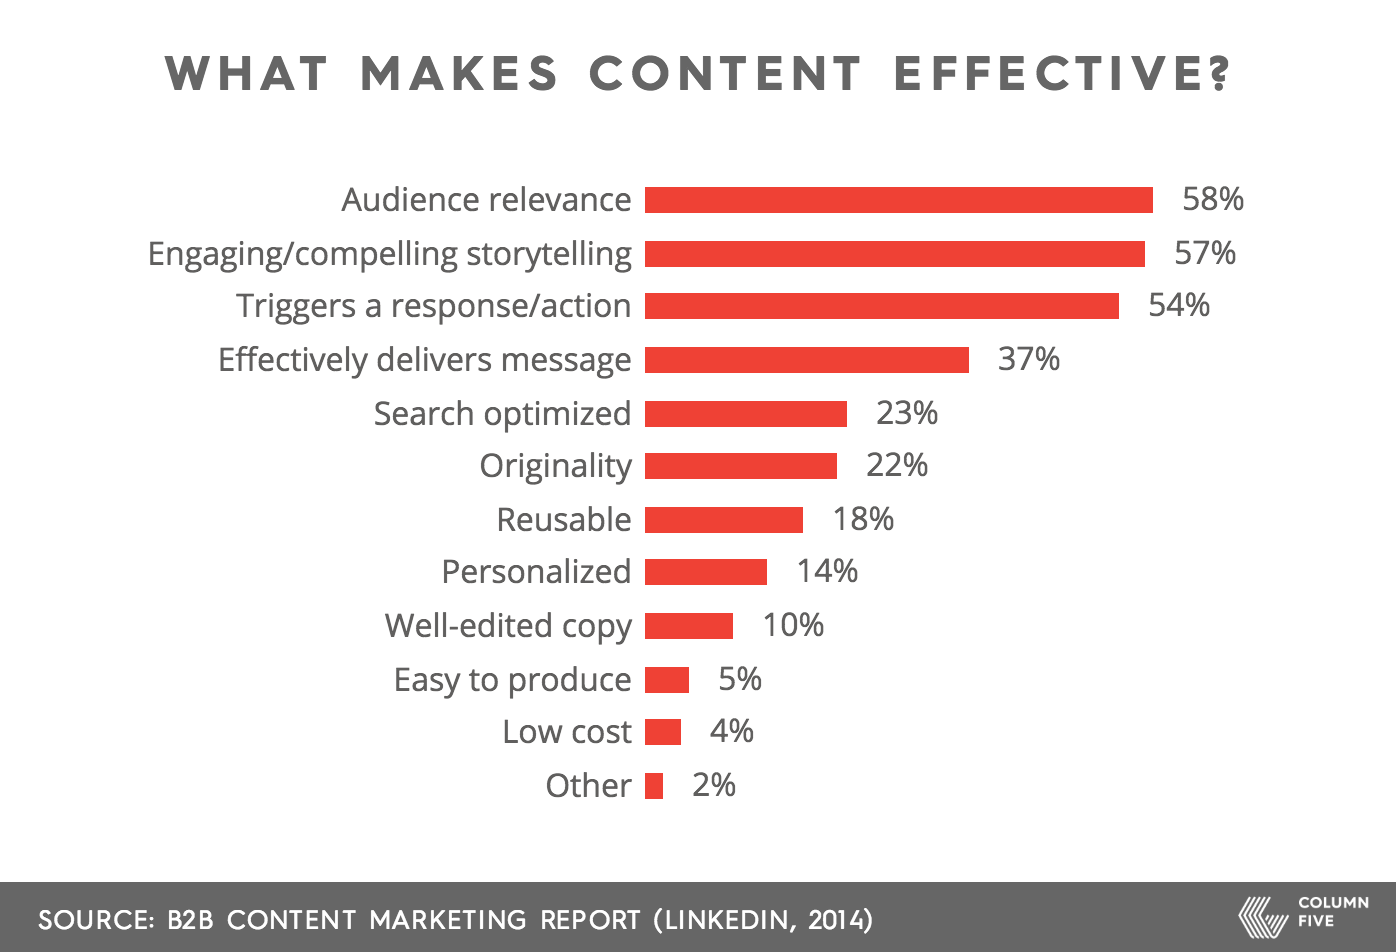 What makes content effective